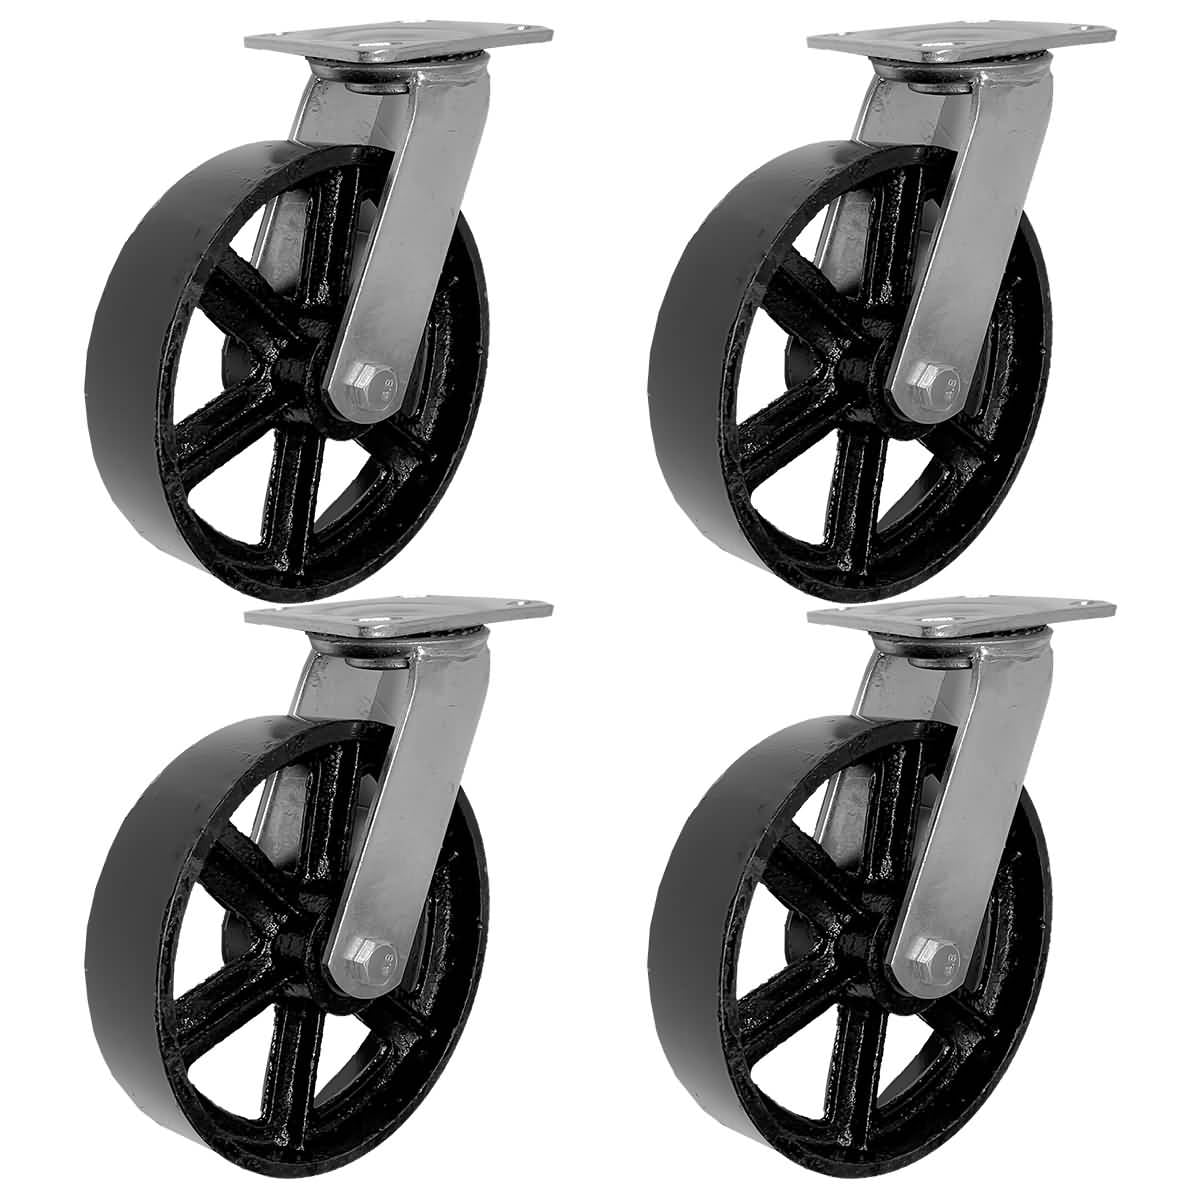 SET OF 4 Casters 8x2 industrial type Antique style 8x2 with bearing  NEW 